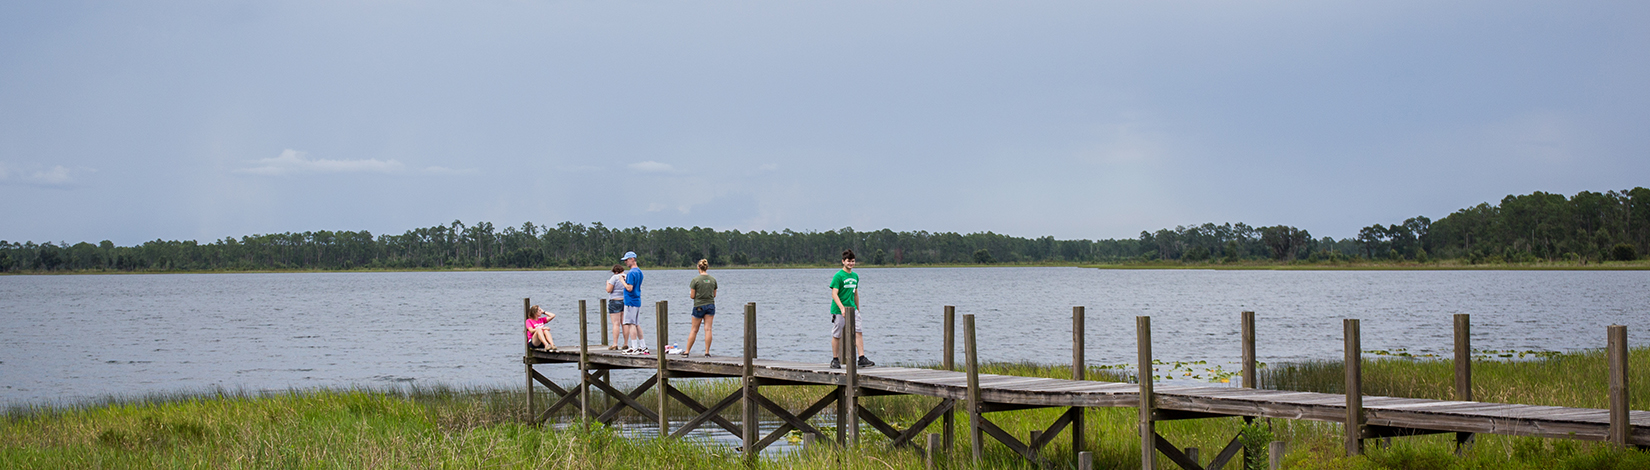 Youth sitting on a dock on a lake at 4-H Camp Ocala.